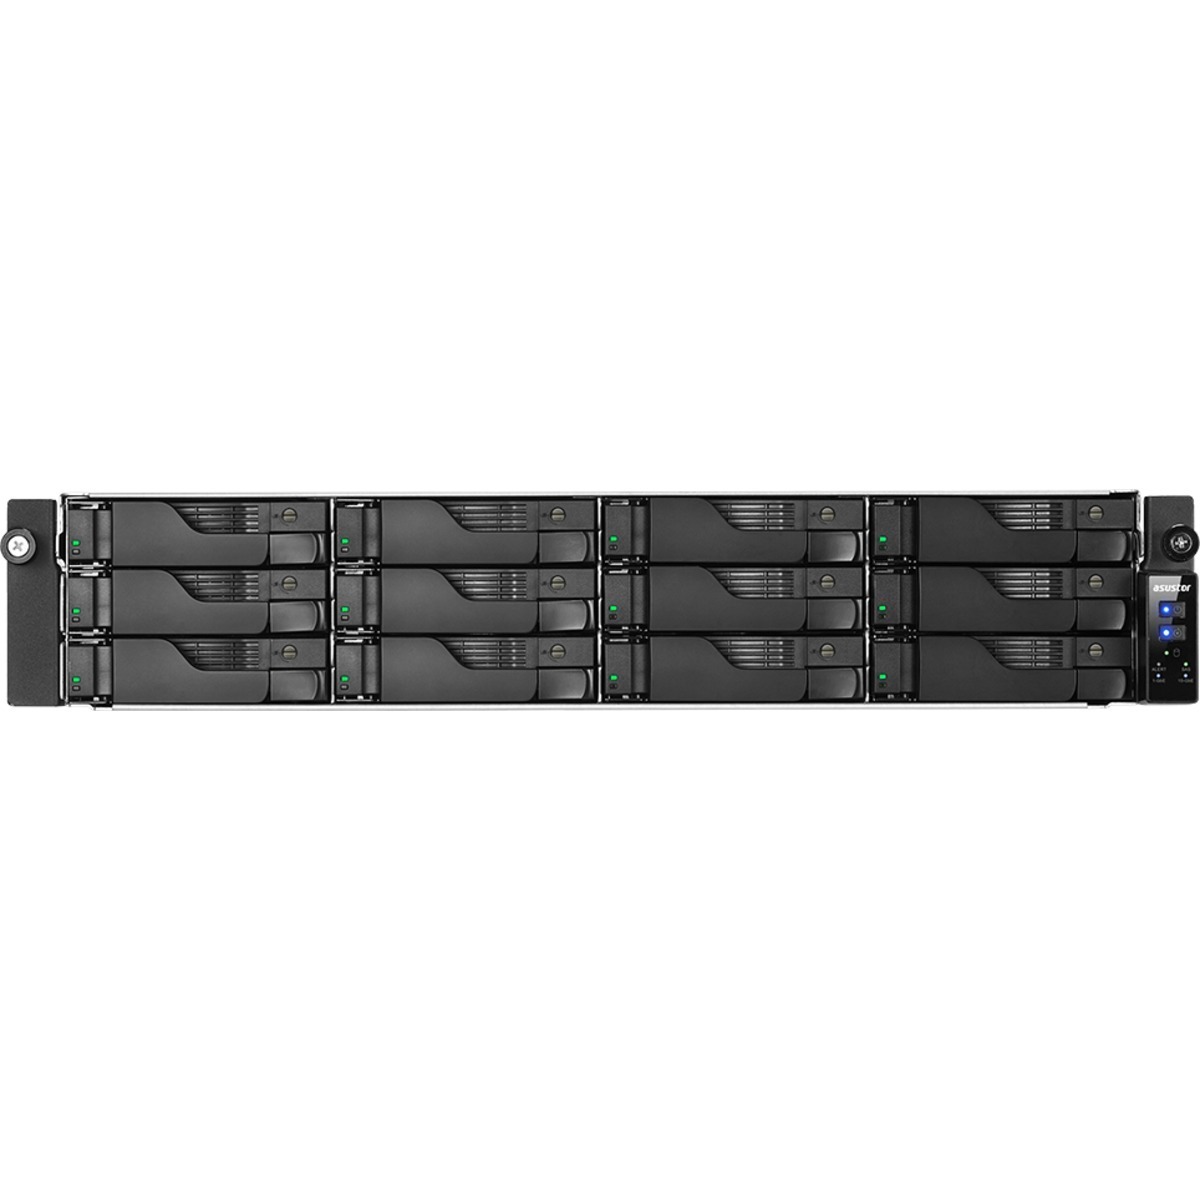 ASUSTOR AS7112RDX Lockerstor 12R Pro 56tb 12-Bay RackMount Large Business / Enterprise NAS - Network Attached Storage Device 7x8tb Seagate IronWolf Pro ST8000NT001 3.5 7200rpm SATA 6Gb/s HDD NAS Class Drives Installed - Burn-In Tested - ON SALE AS7112RDX Lockerstor 12R Pro